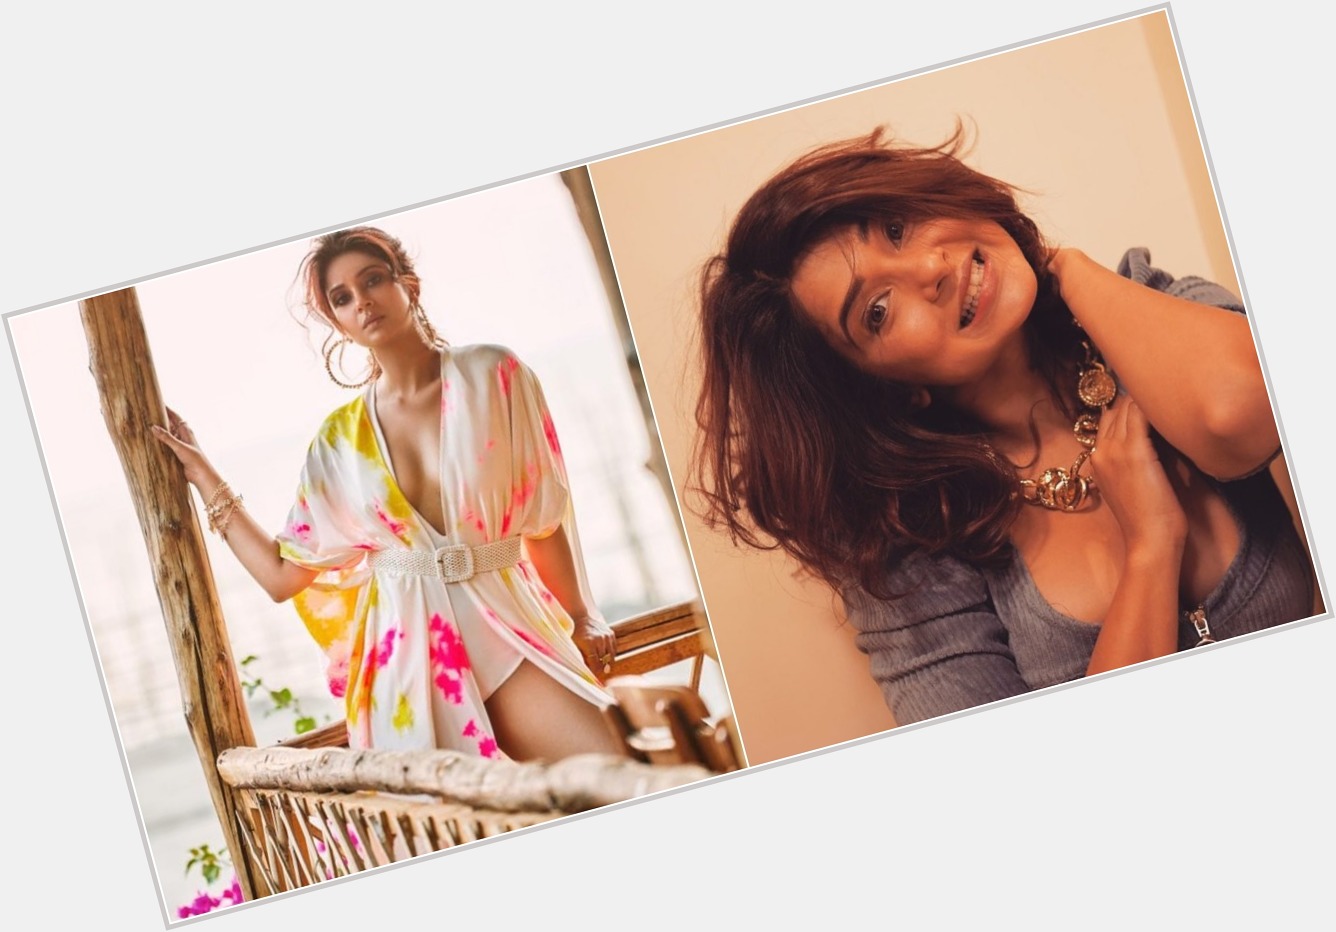 Happy birthday Jennifer Winget: Beautiful pictures of the telly town diva go viral
For more:  